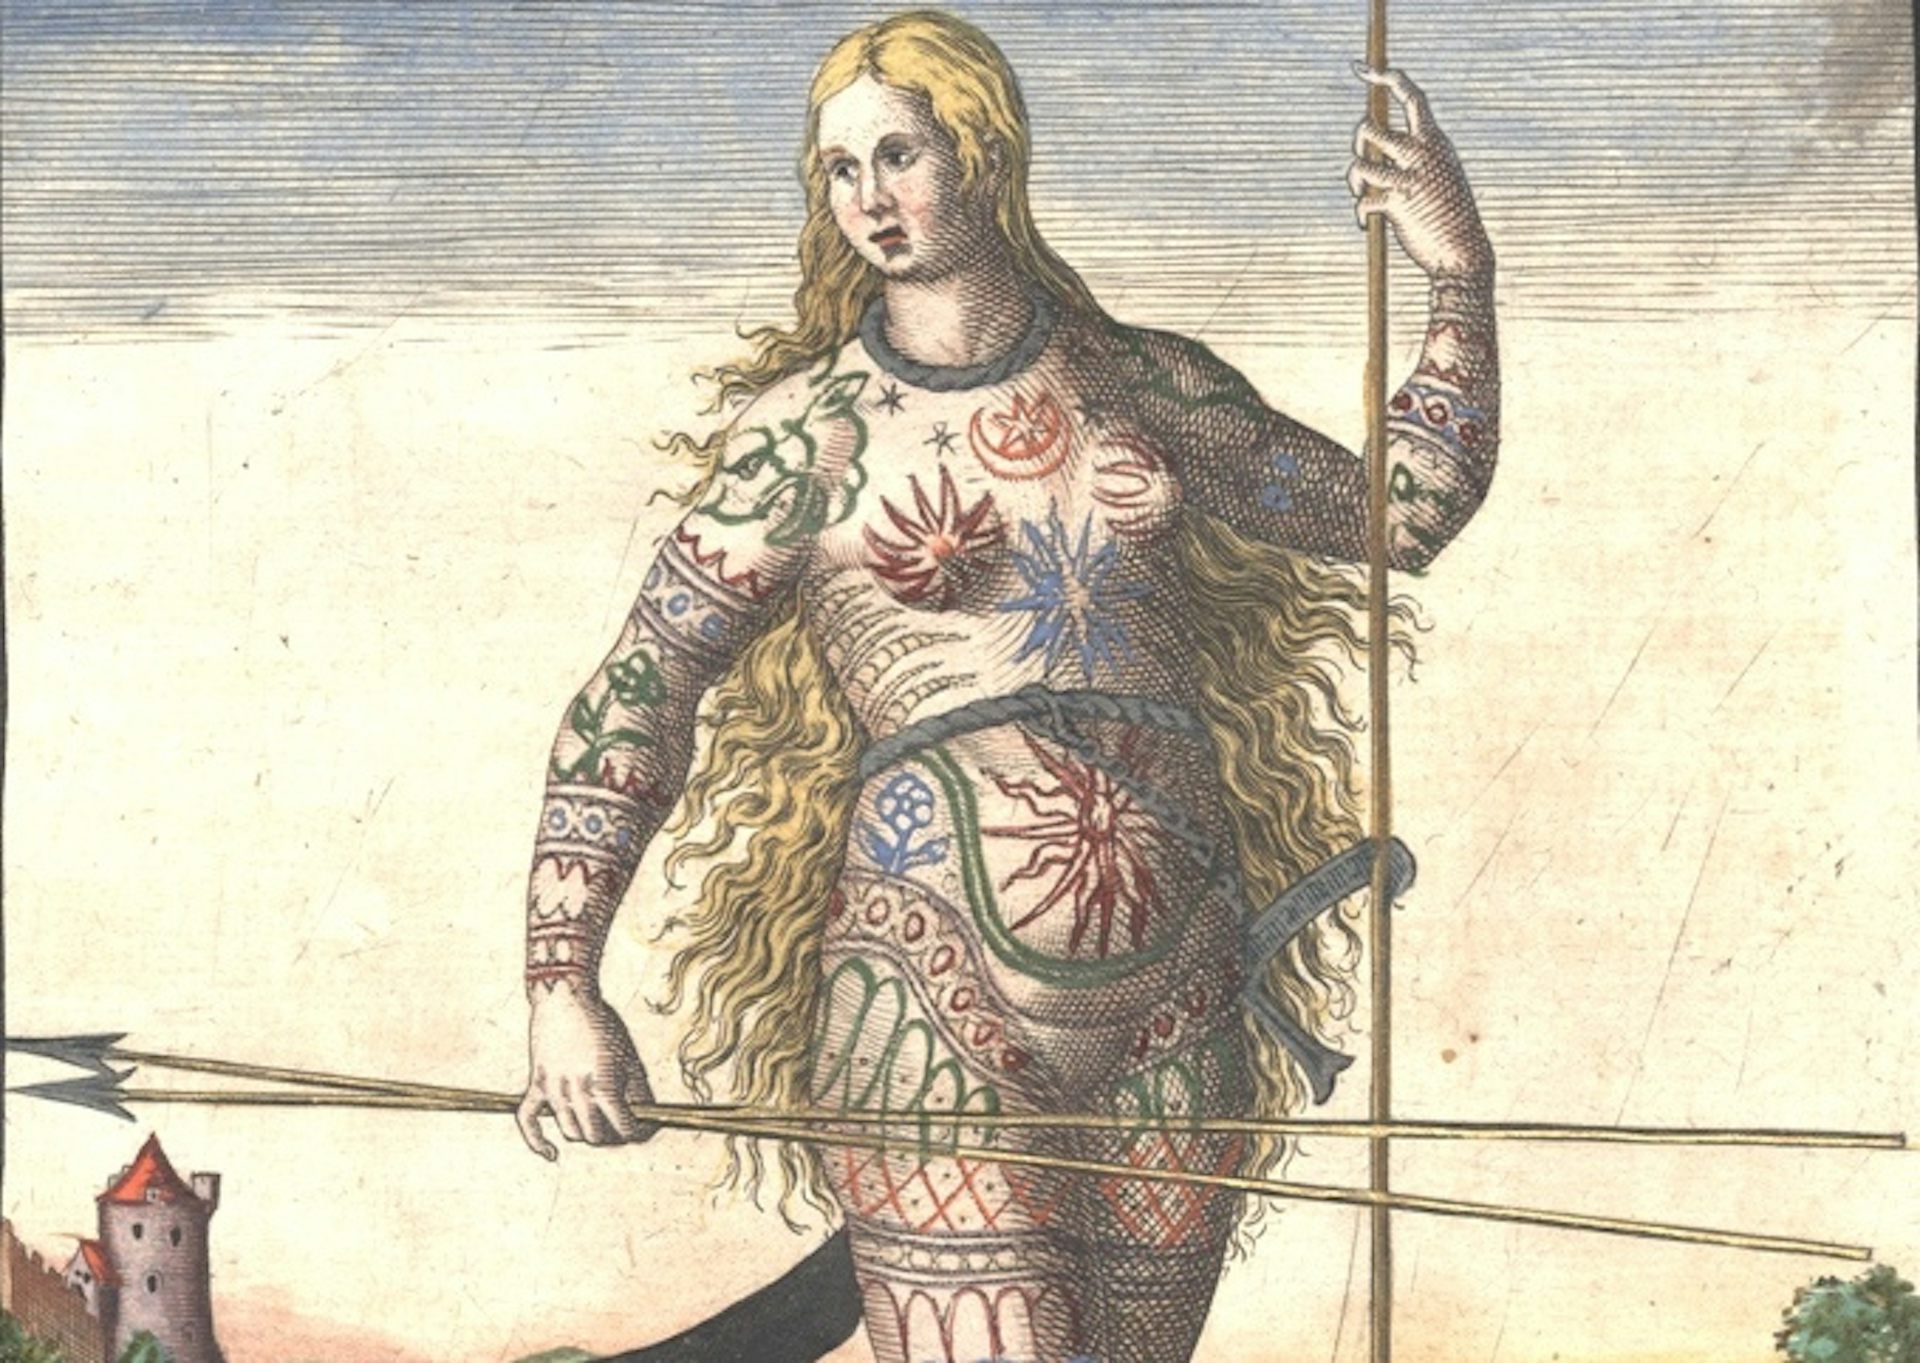 Tattoos have a long history going back to the ancient world  and also to  colonialism